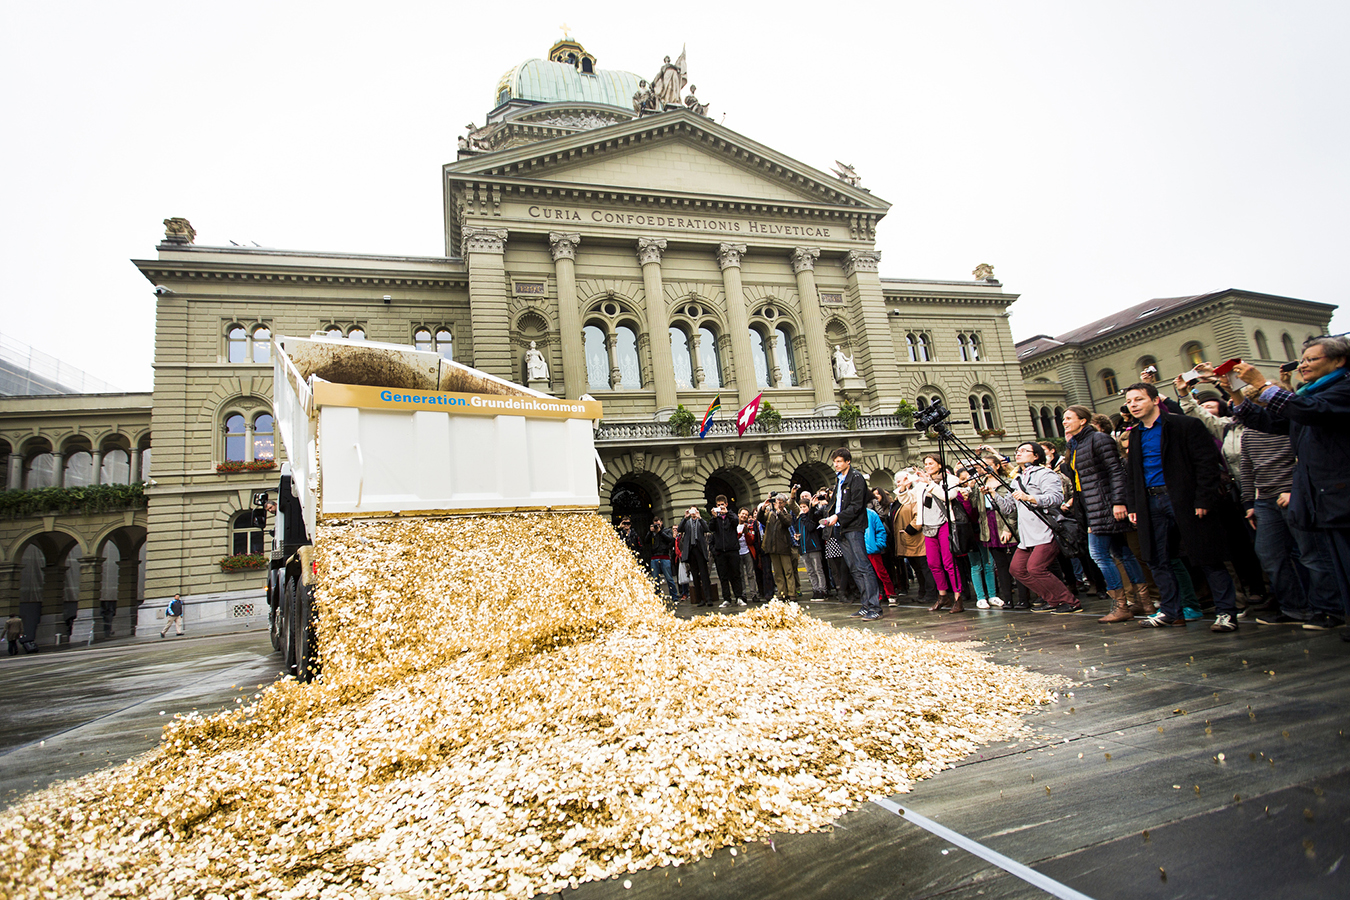 Commencement of the “coin action” in Bern. Photo by Stefan Bohrer.